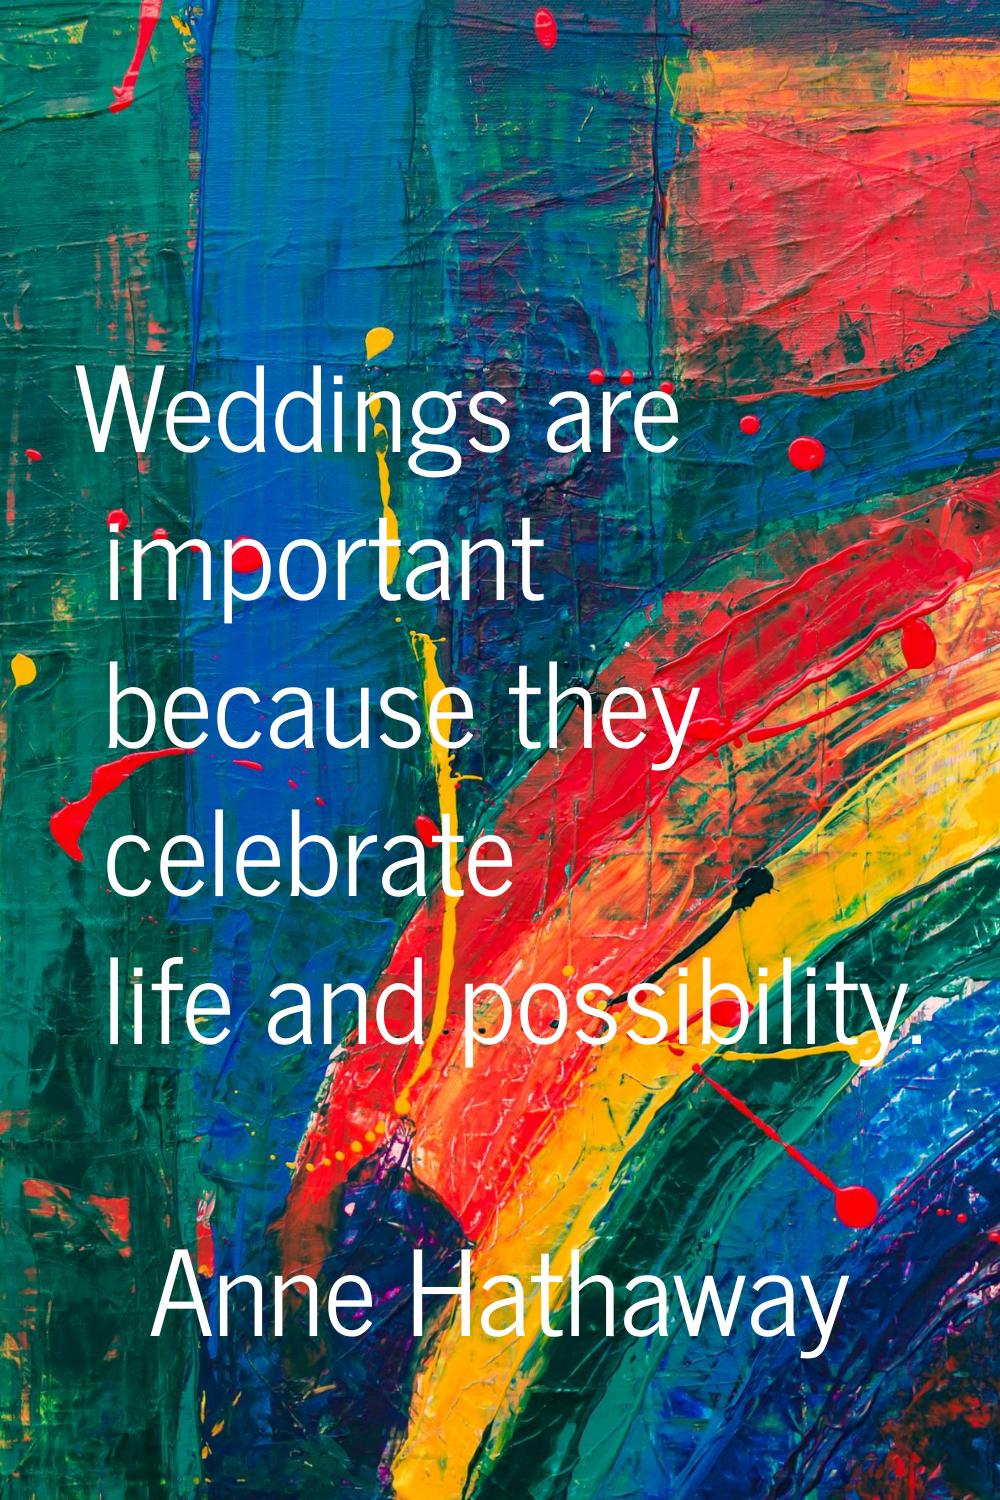 Weddings are important because they celebrate life and possibility.